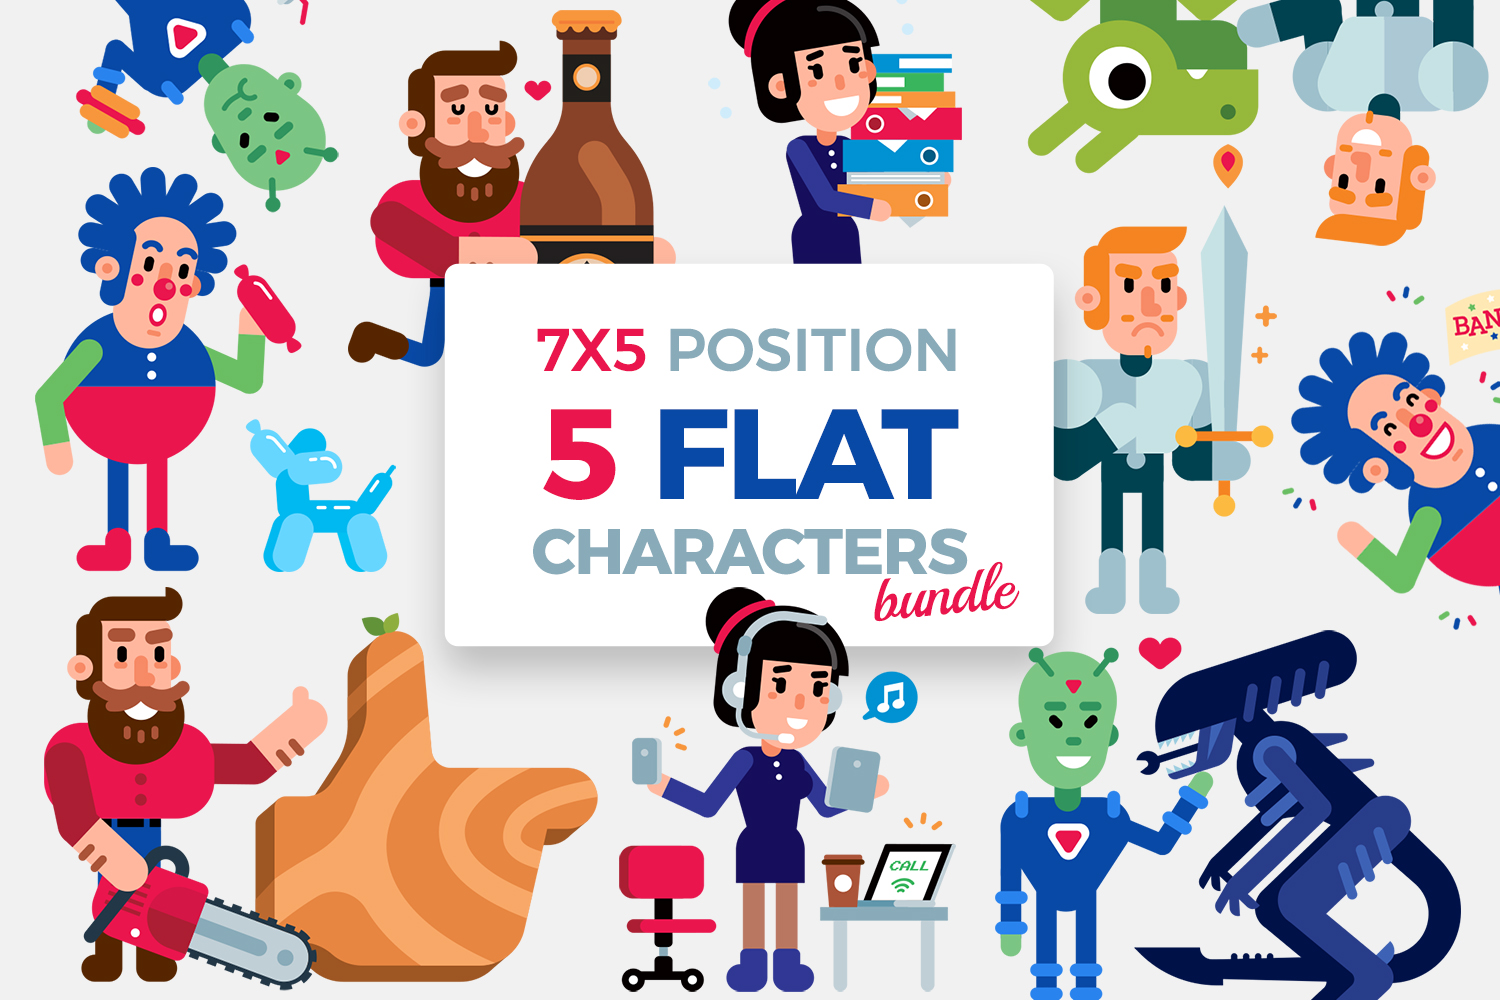 what is the purpose of flat characters